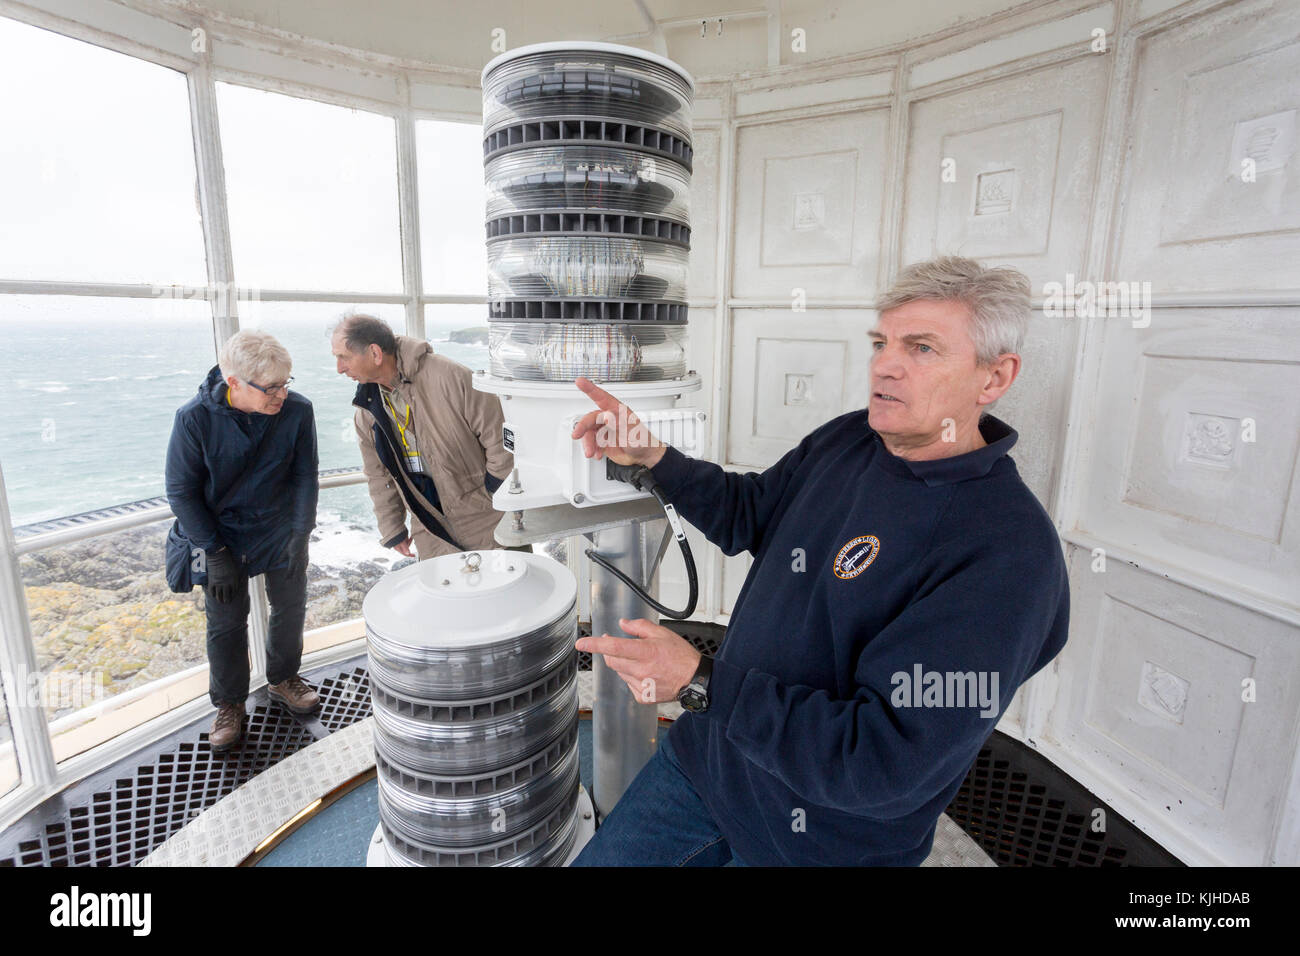 The Northern Lighthouse Board attendant demonstrates how the new LED lantern works at Buchan Ness lighthouse, Boddam, Aberdeenshire, Scotland, UK Stock Photo